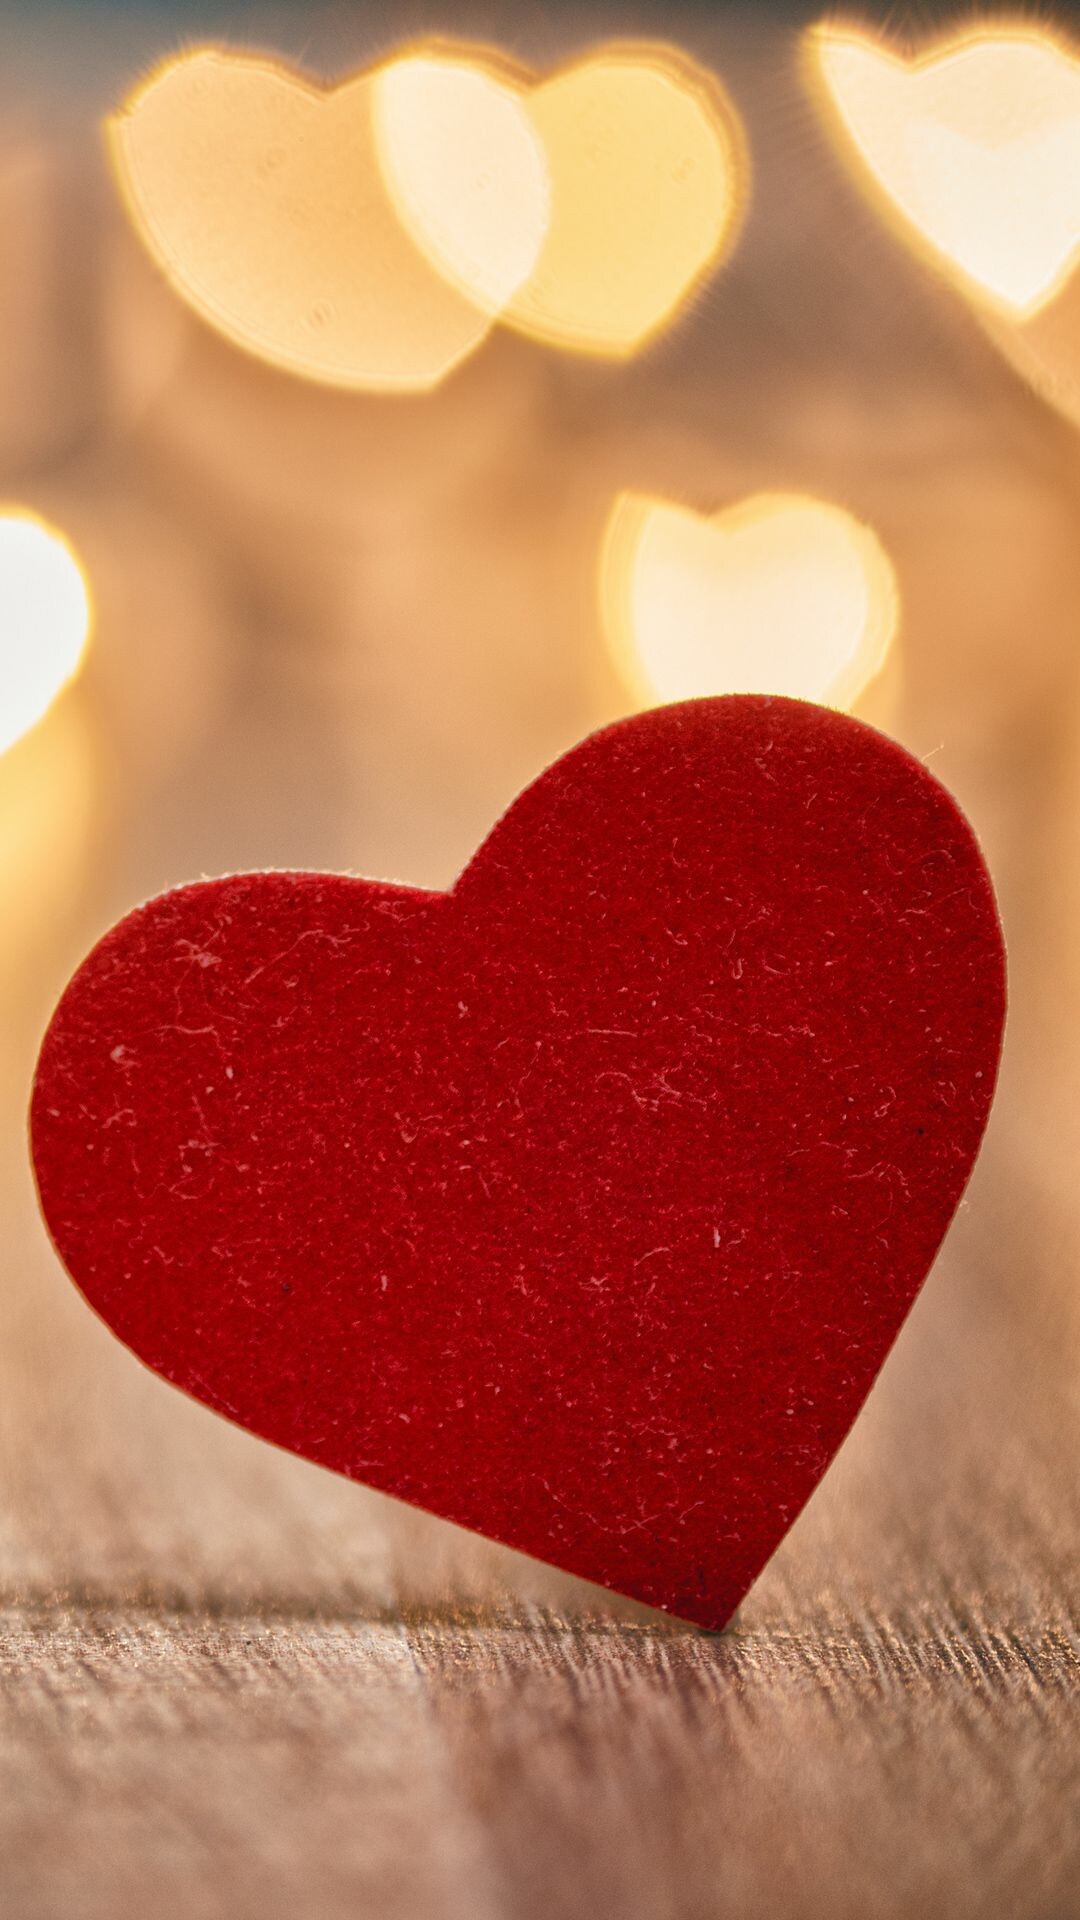 Heart: Associated with spiritual symbolism, in addition to human love. 1080x1920 Full HD Wallpaper.